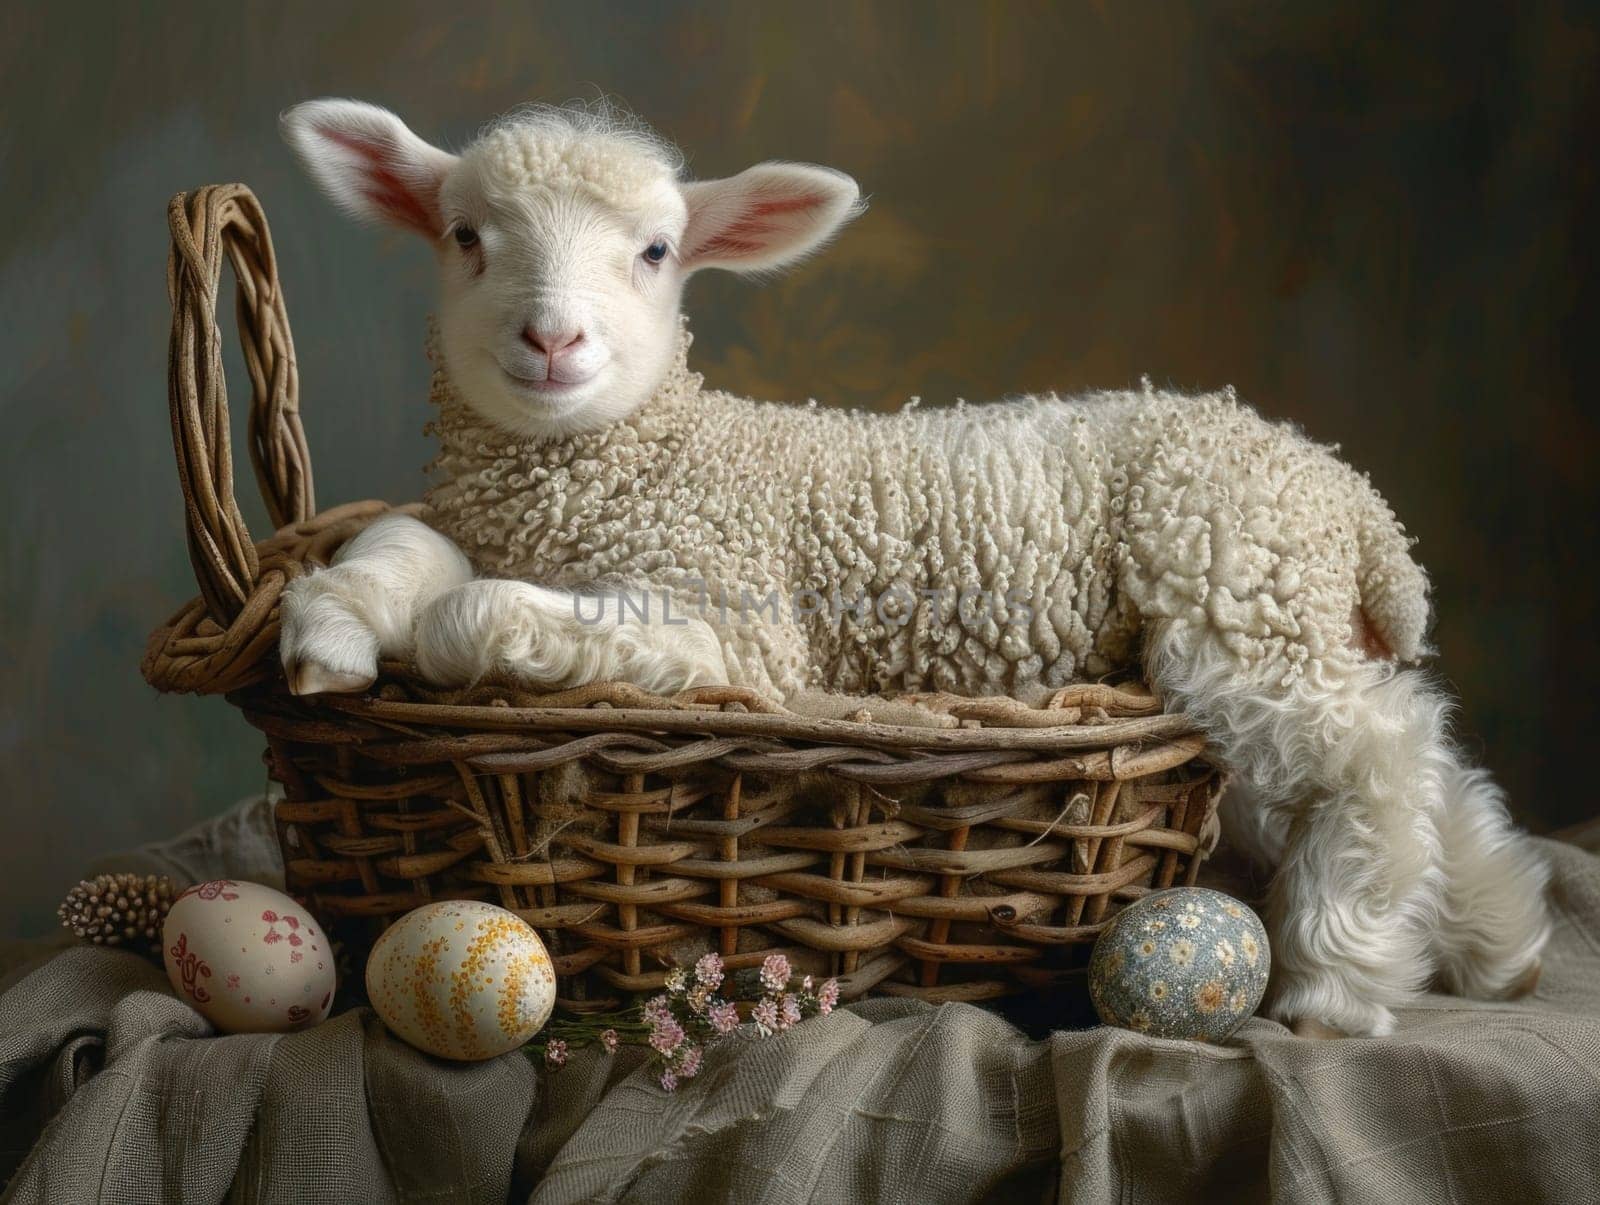 A sheep lying in a basket surrounded by colorful Easter eggs.